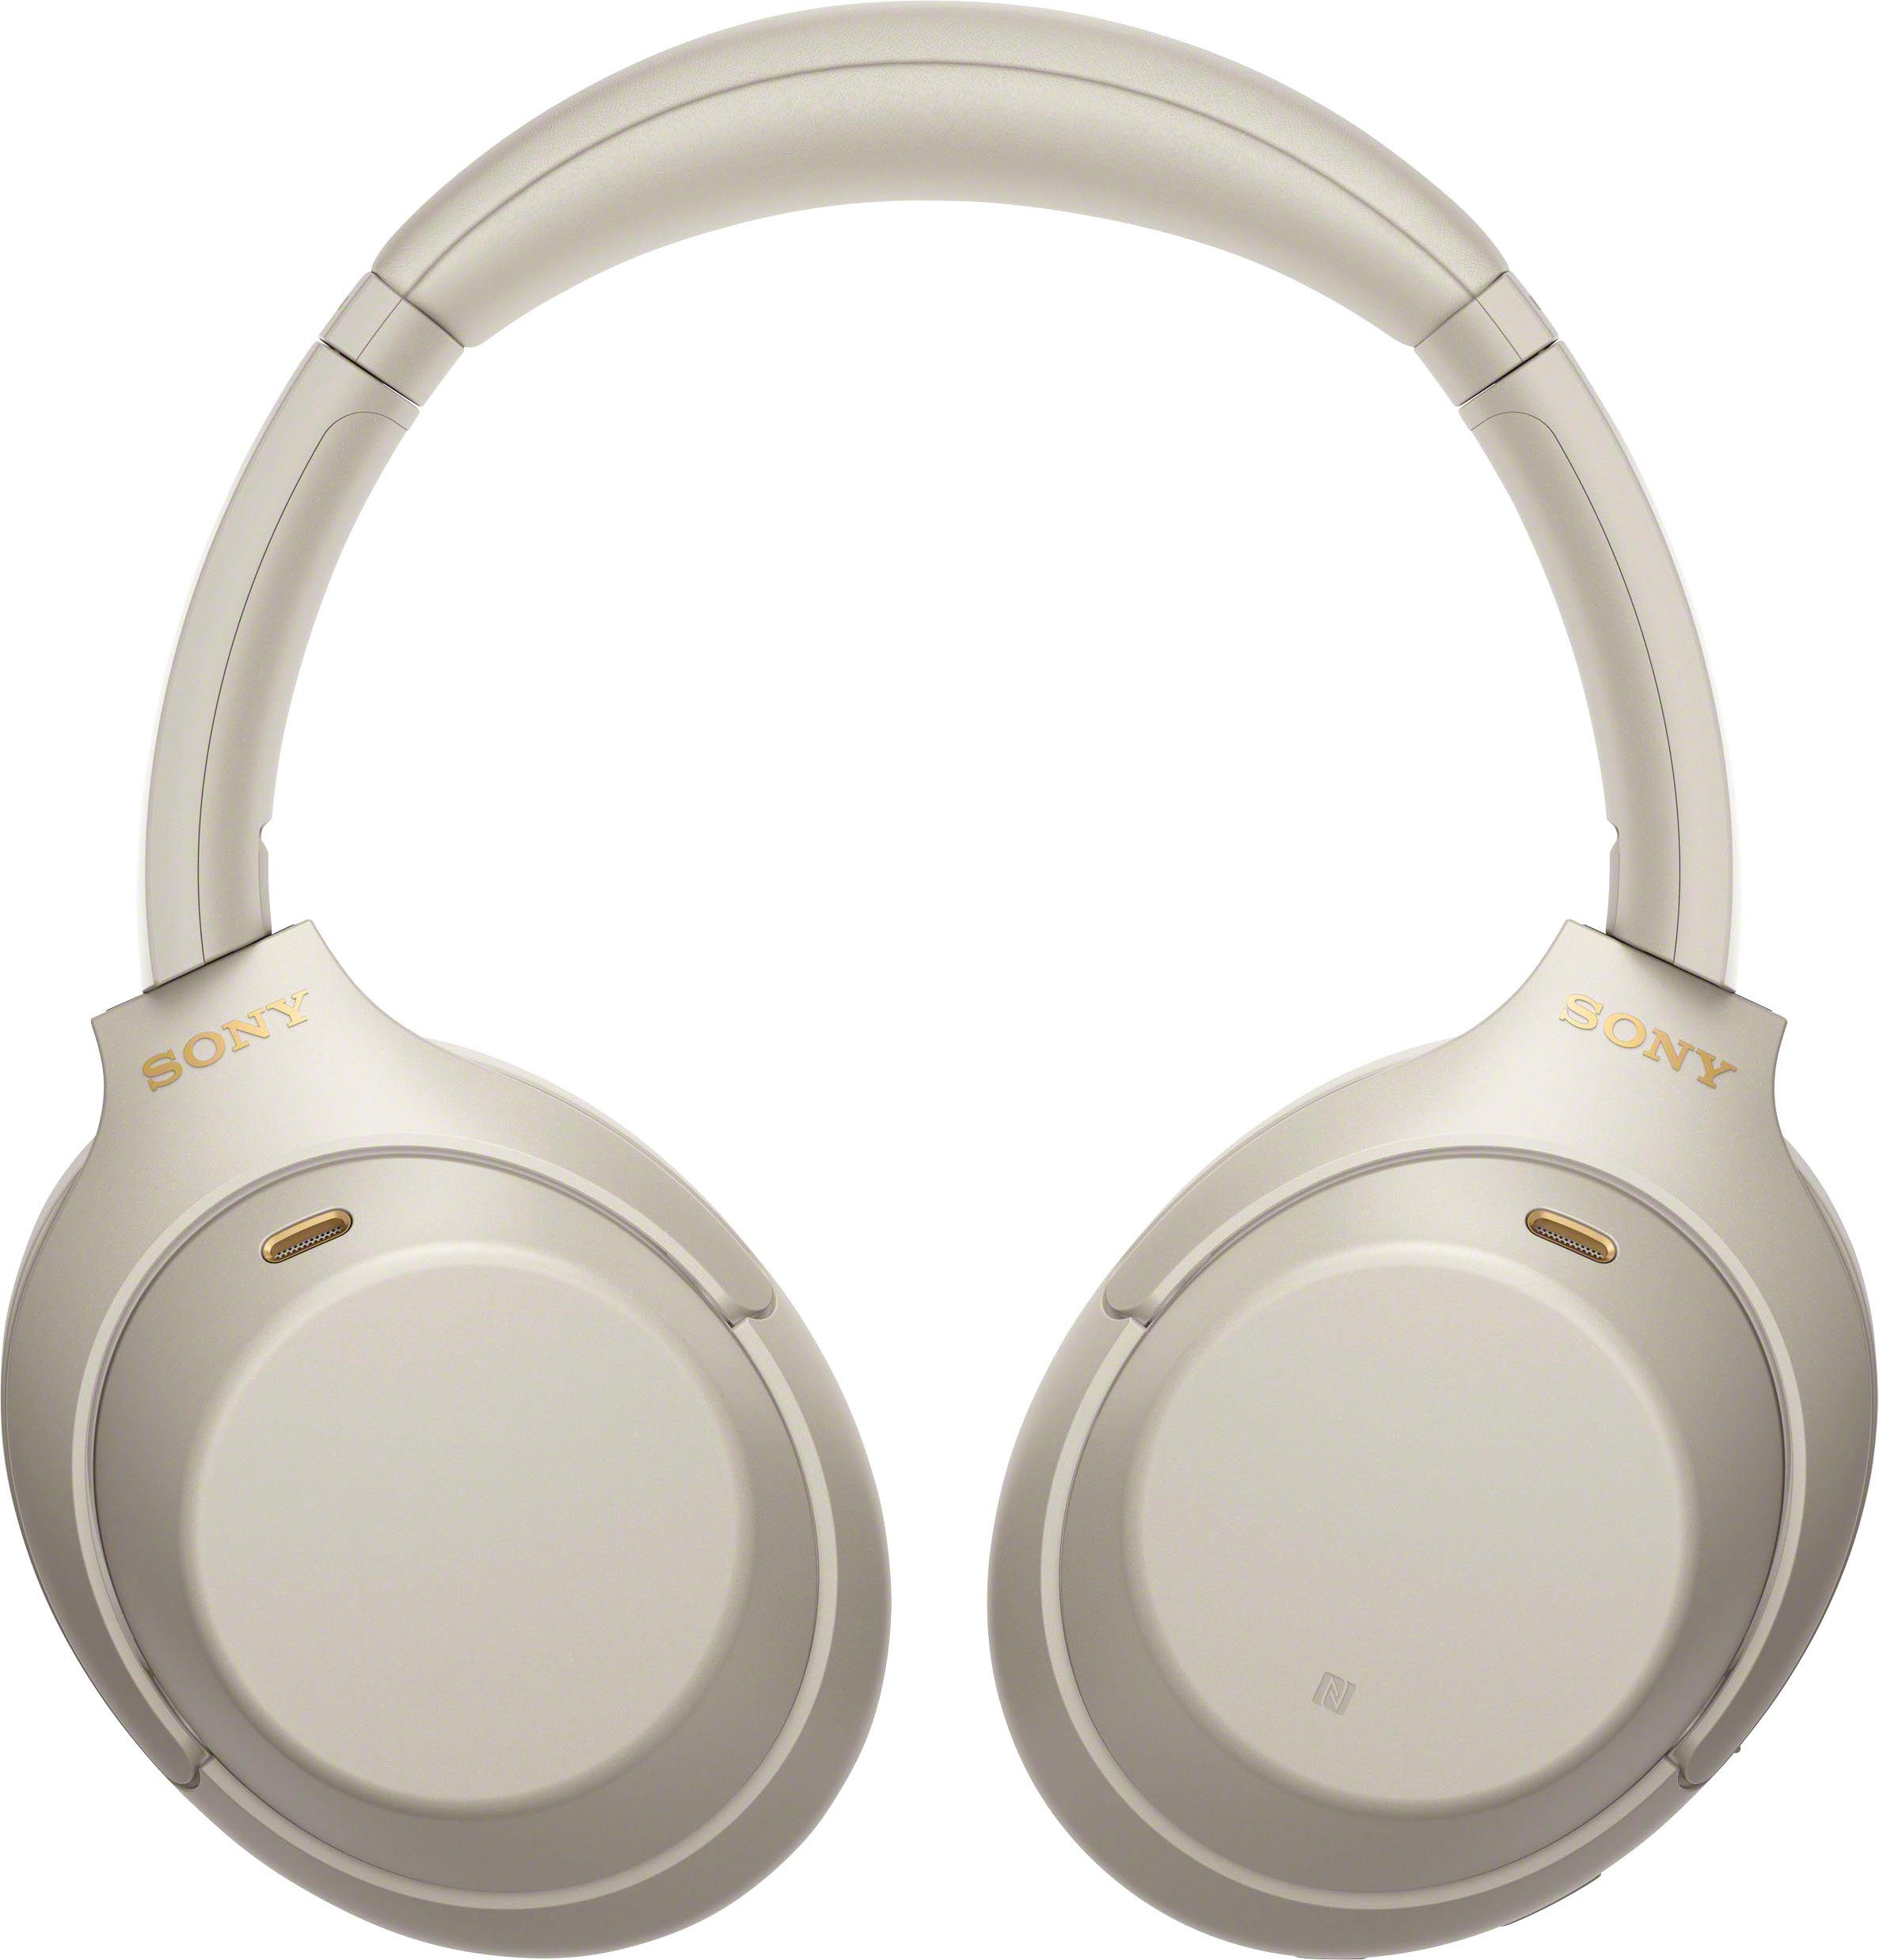 Sony WH-1000XM4 kabelloser Touch NFC, Silber Verbindung via One-Touch NFC, Over-Ear-Kopfhörer Sensor, (Noise-Cancelling, Schnellladefunktion) Bluetooth